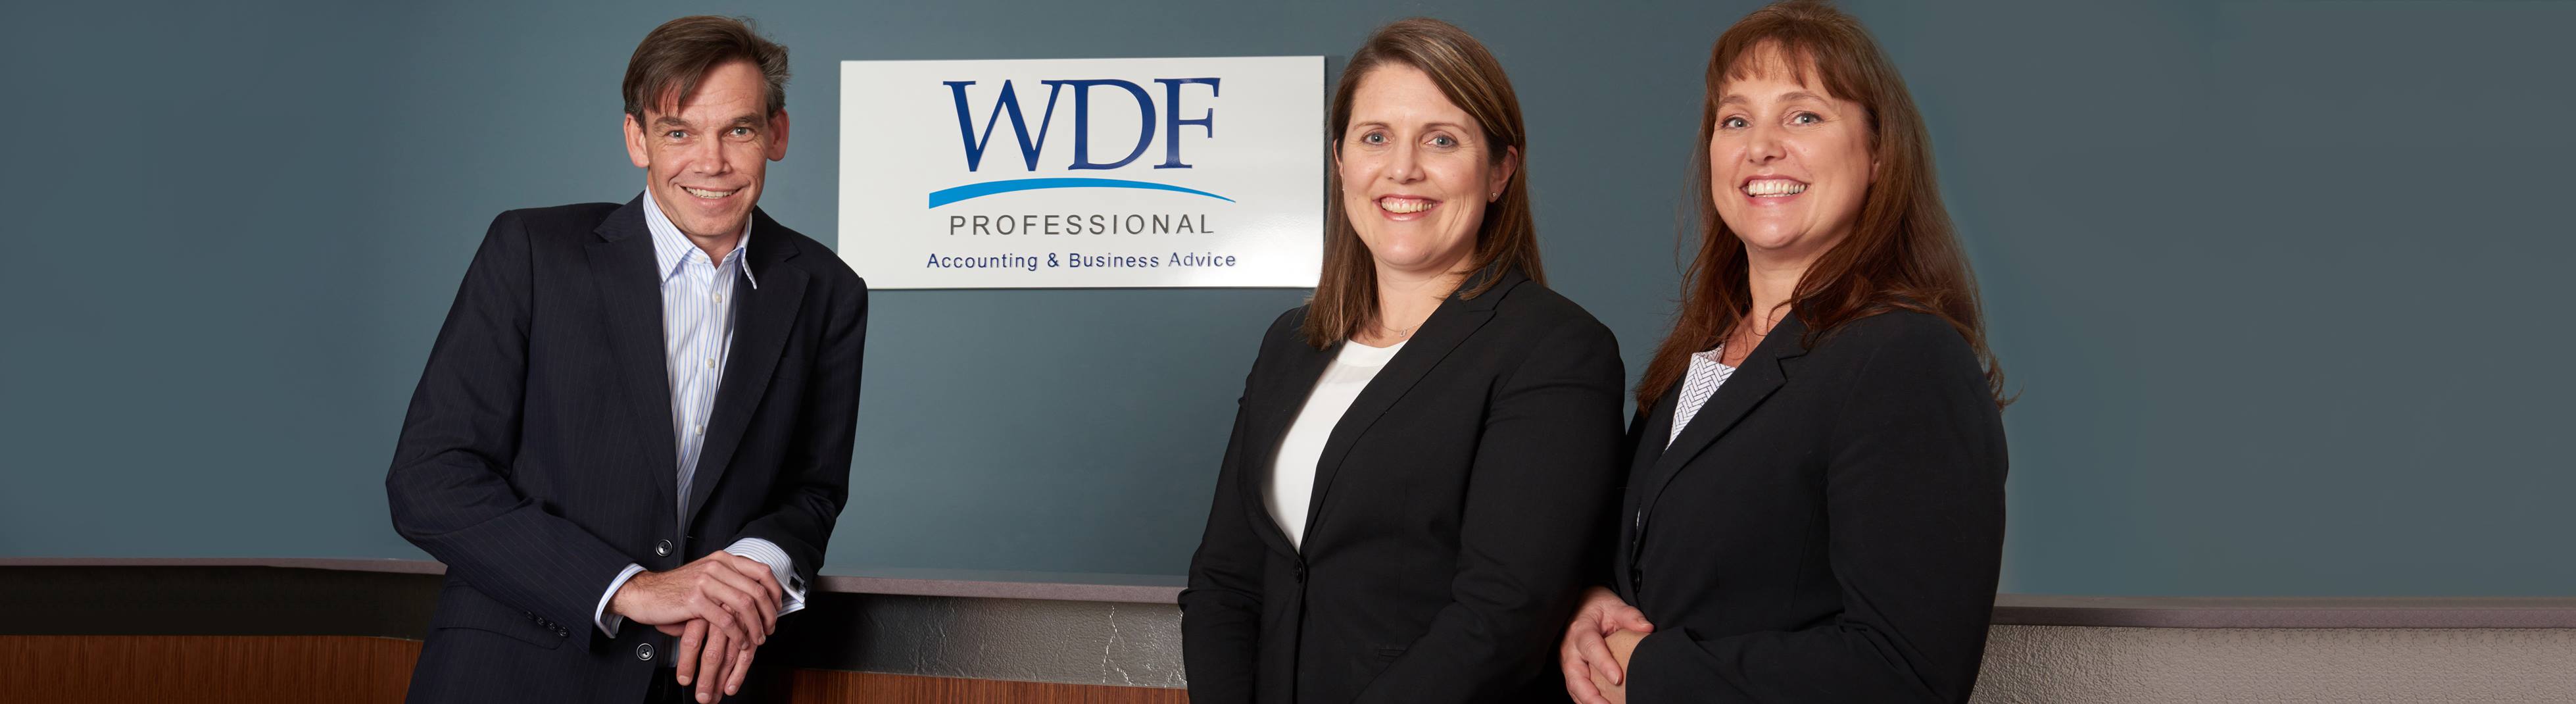 WDF Professional Accounting & Business Advice